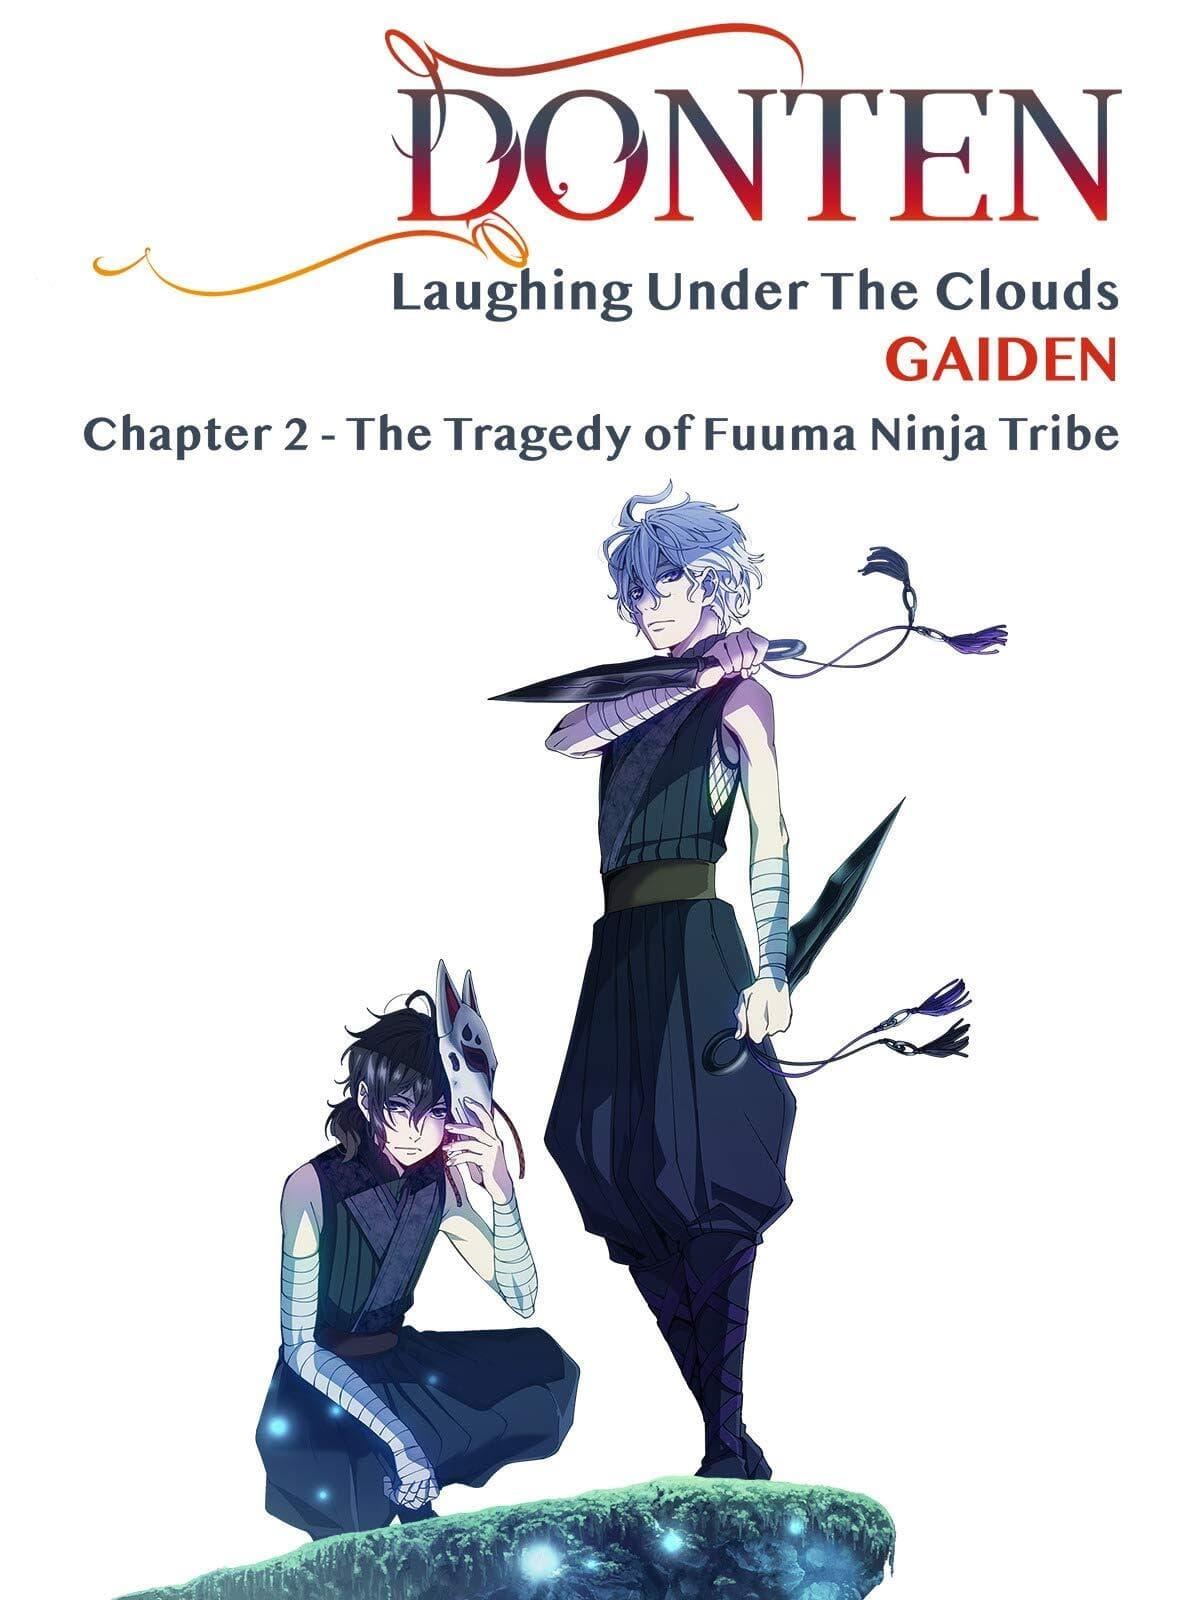 Donten: Laughing Under the Clouds - Gaiden: Chapter 2 - The Tragedy of Fuuma Ninja Tribe poster